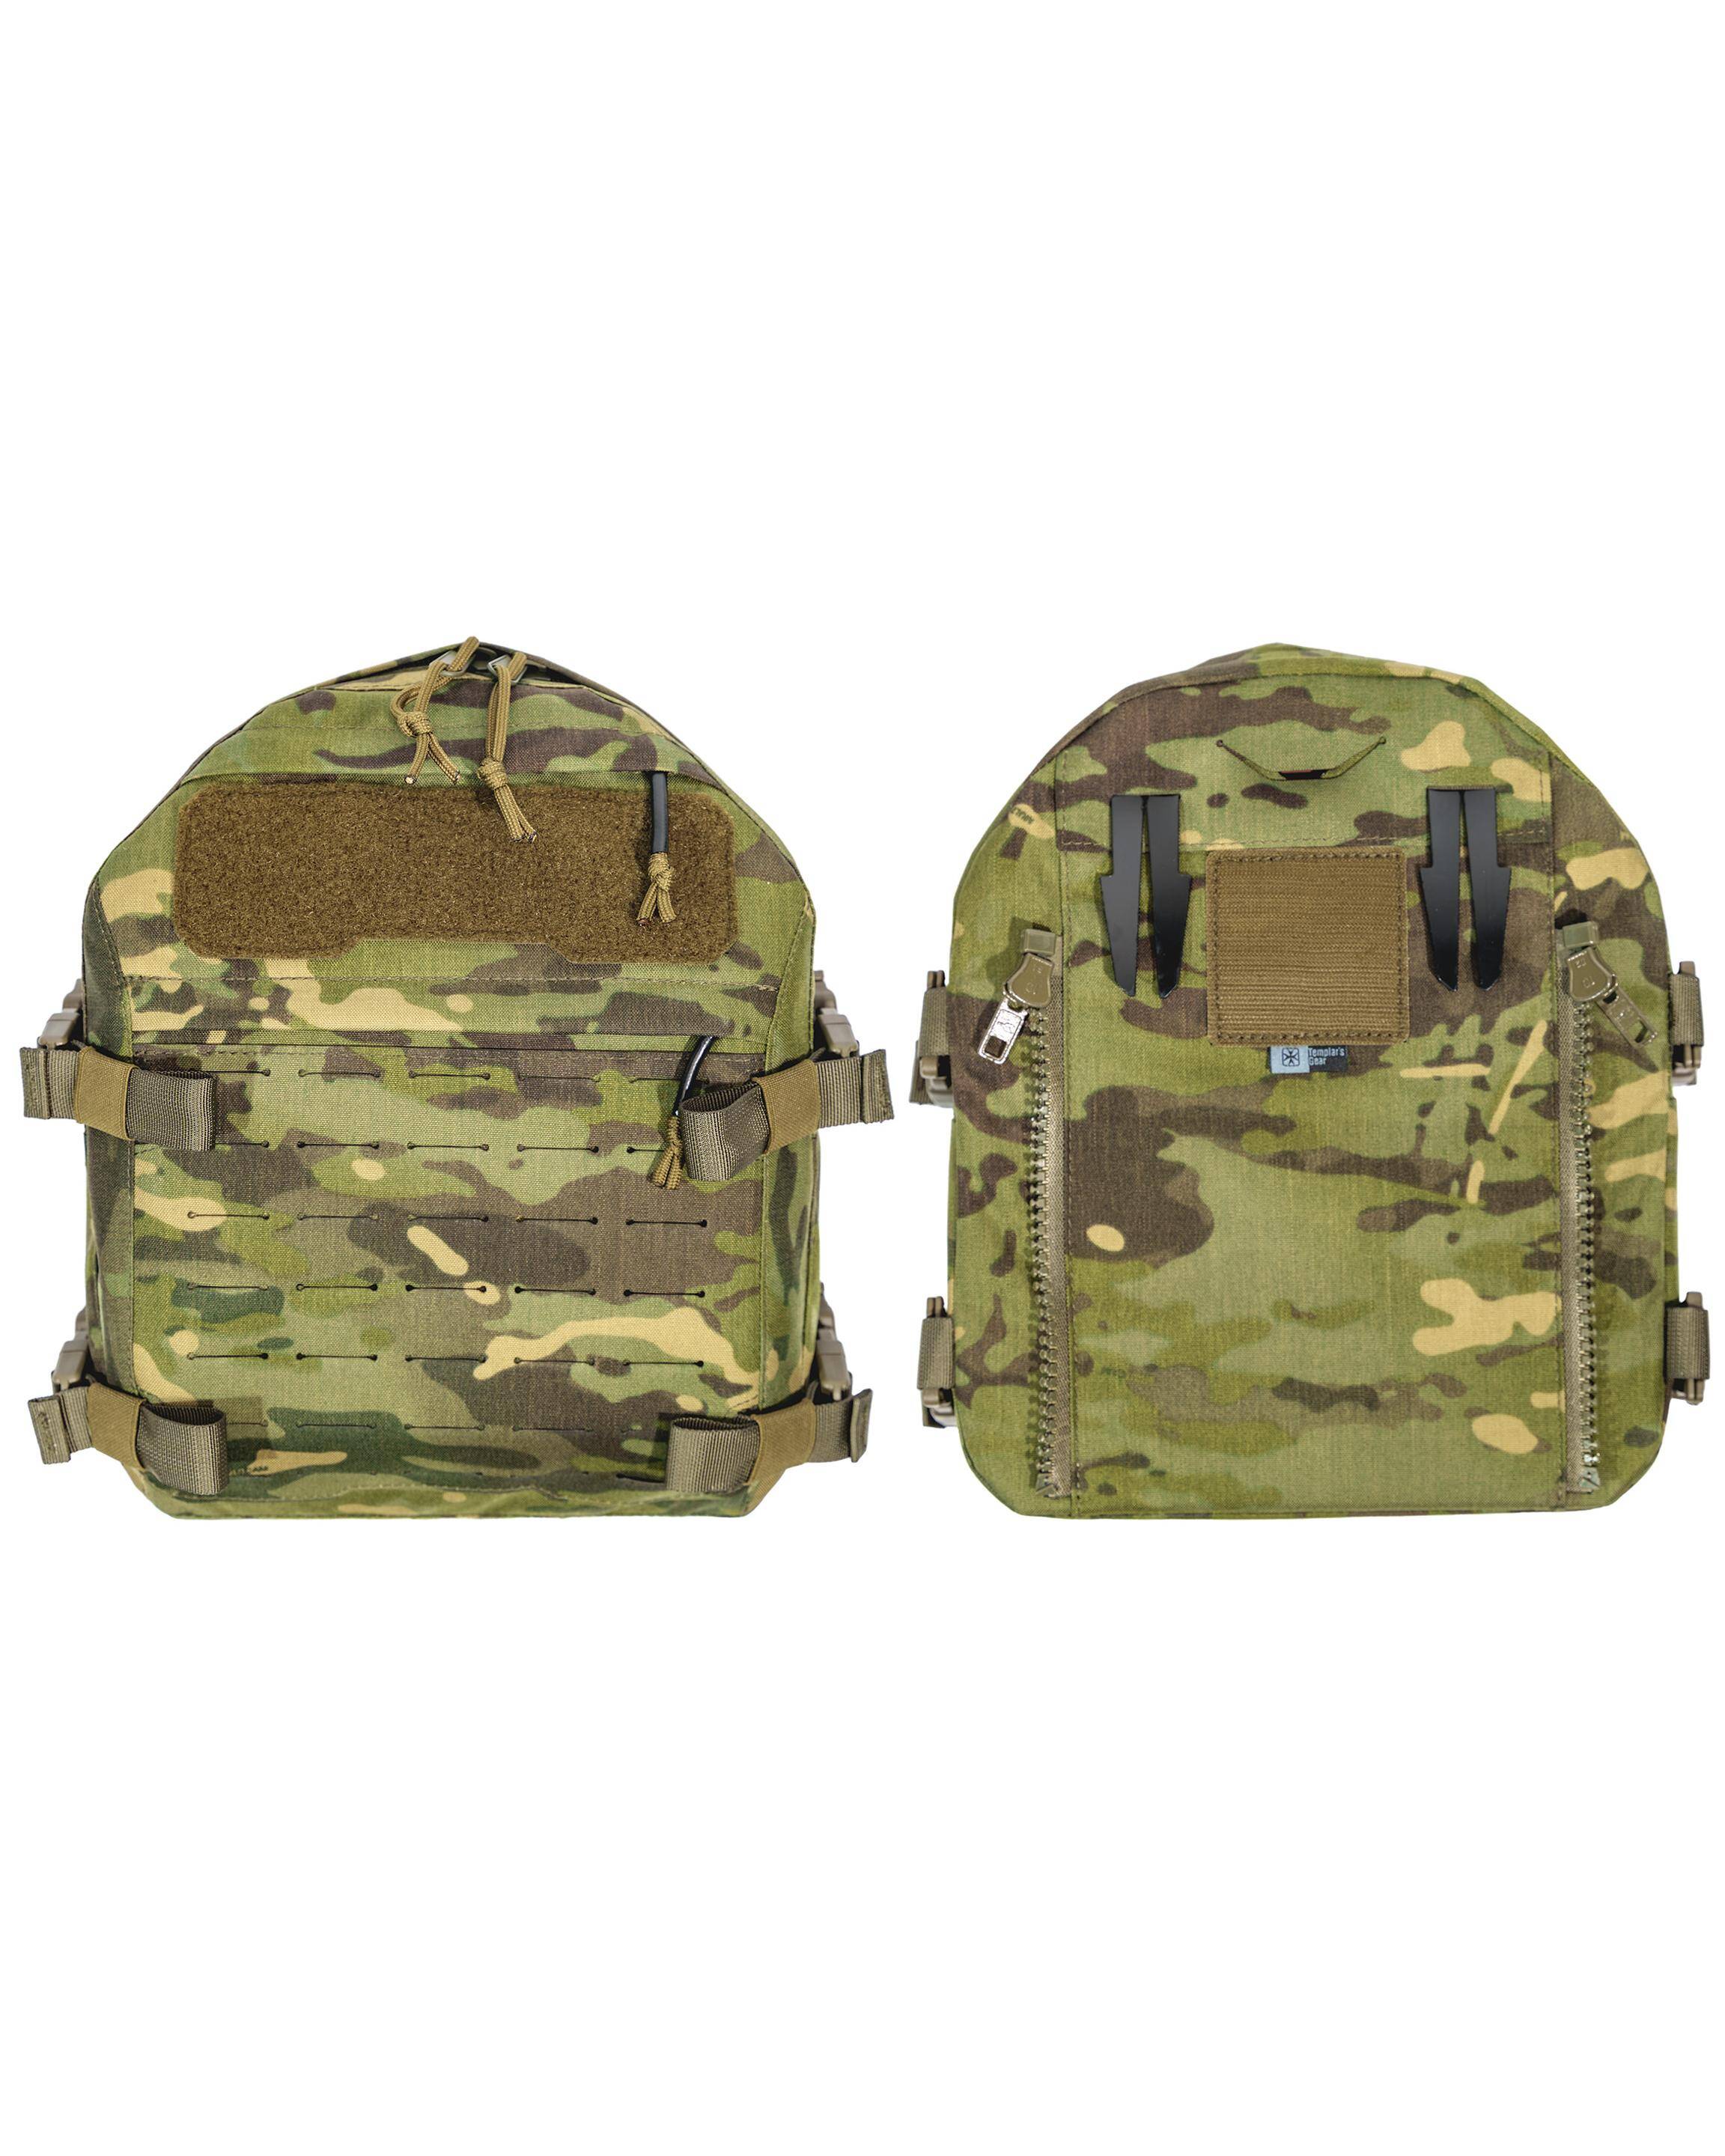 TG-CPC Flat Pack H1 SMALL MultiCam